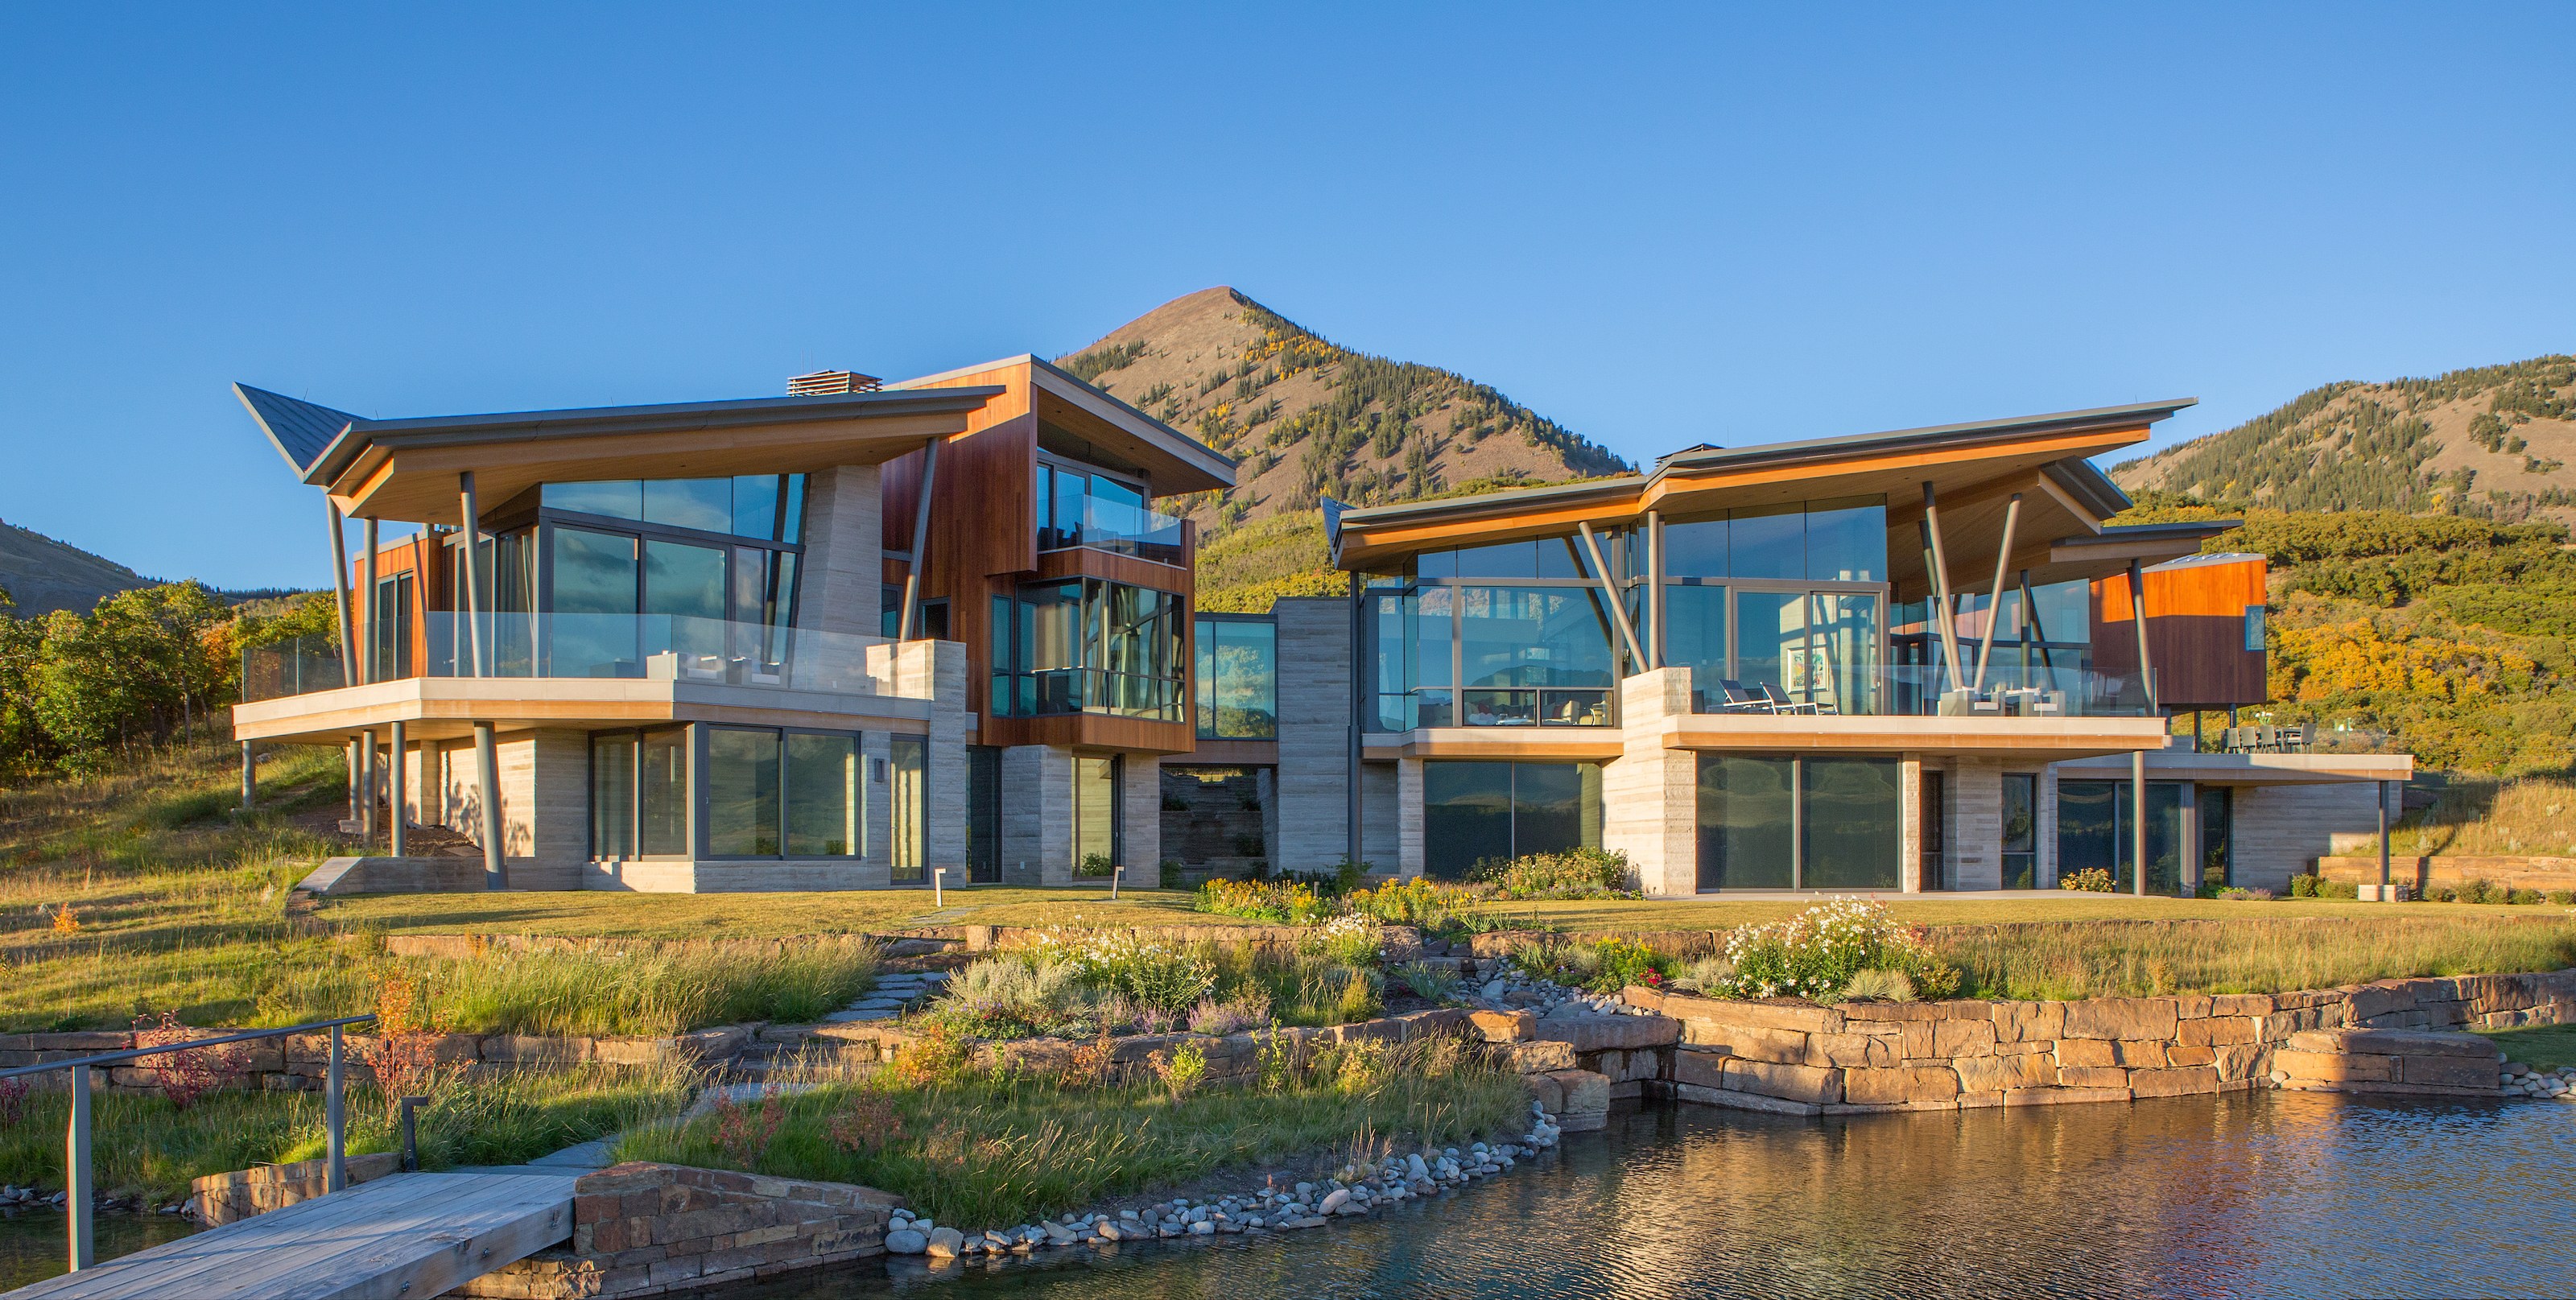 A $32.5 Million Glass House on the Edge of a Cliff in the Rocky ...